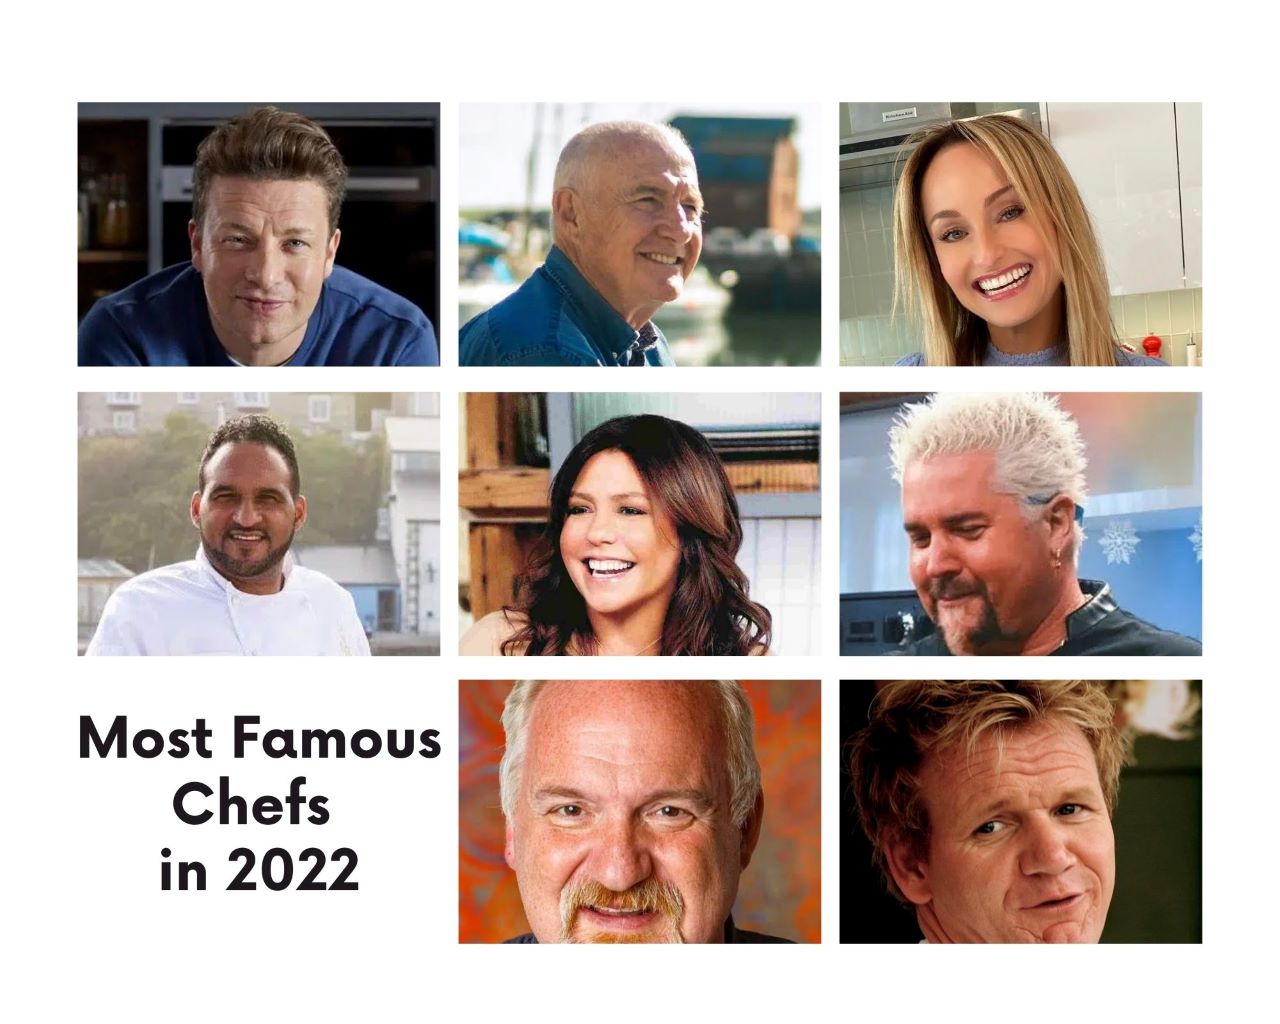 Most Popular Chefs in 2022